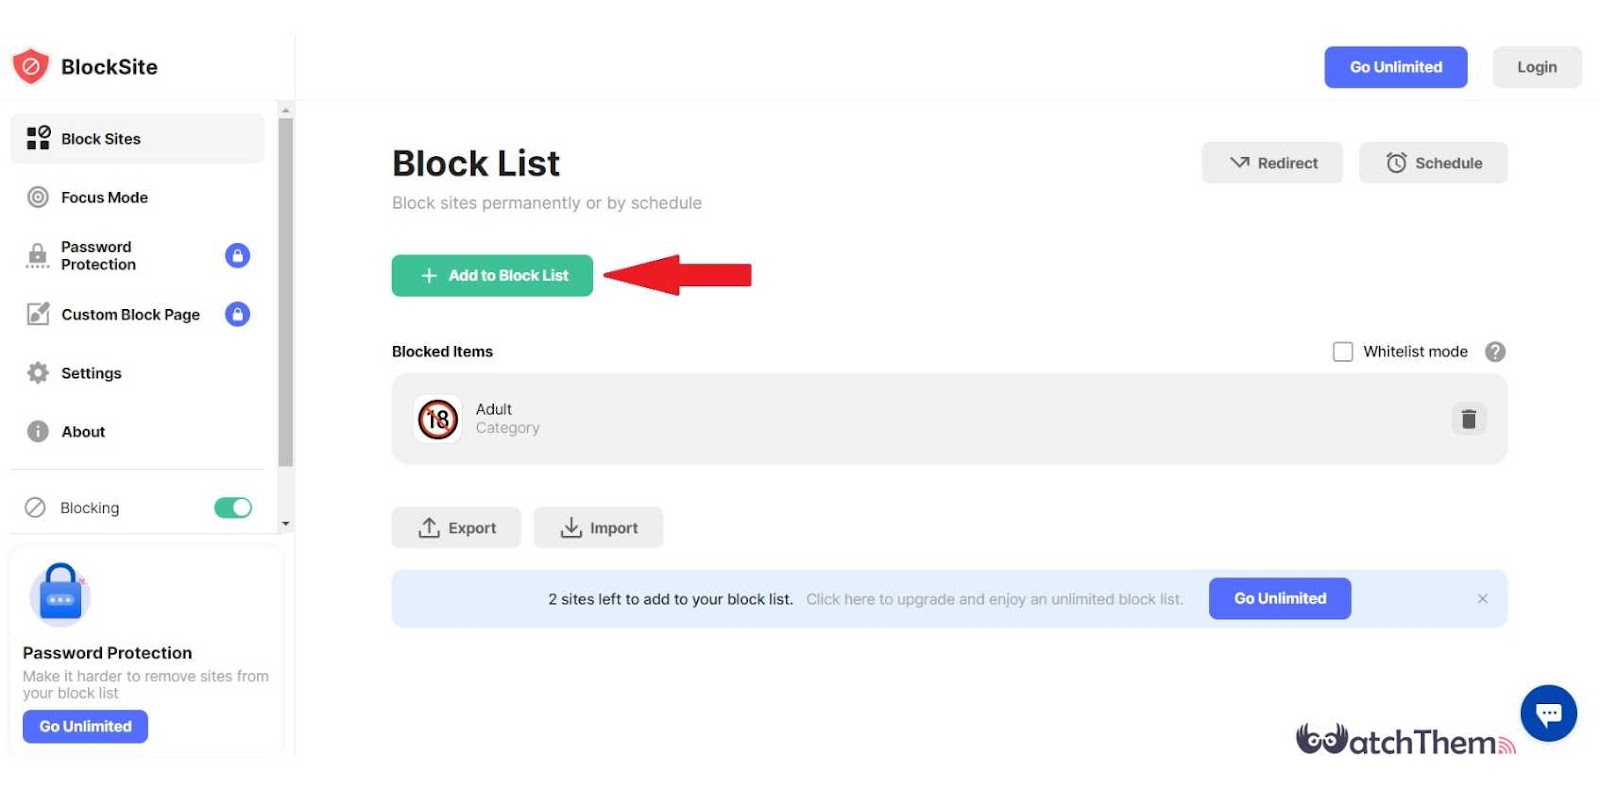 How to Add a Website on Blocksite